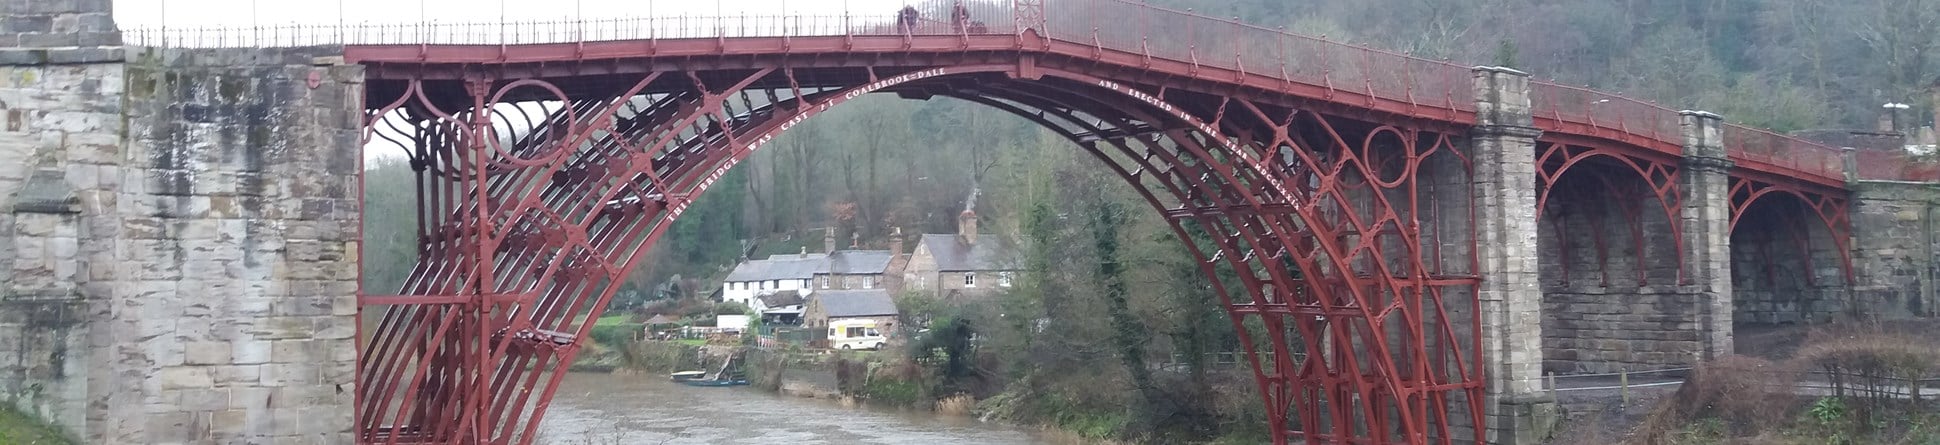 The Iron Bridge within the Ironbridge Gorge World Heritage Site, following the 2017/18 conservation project by English Heritage